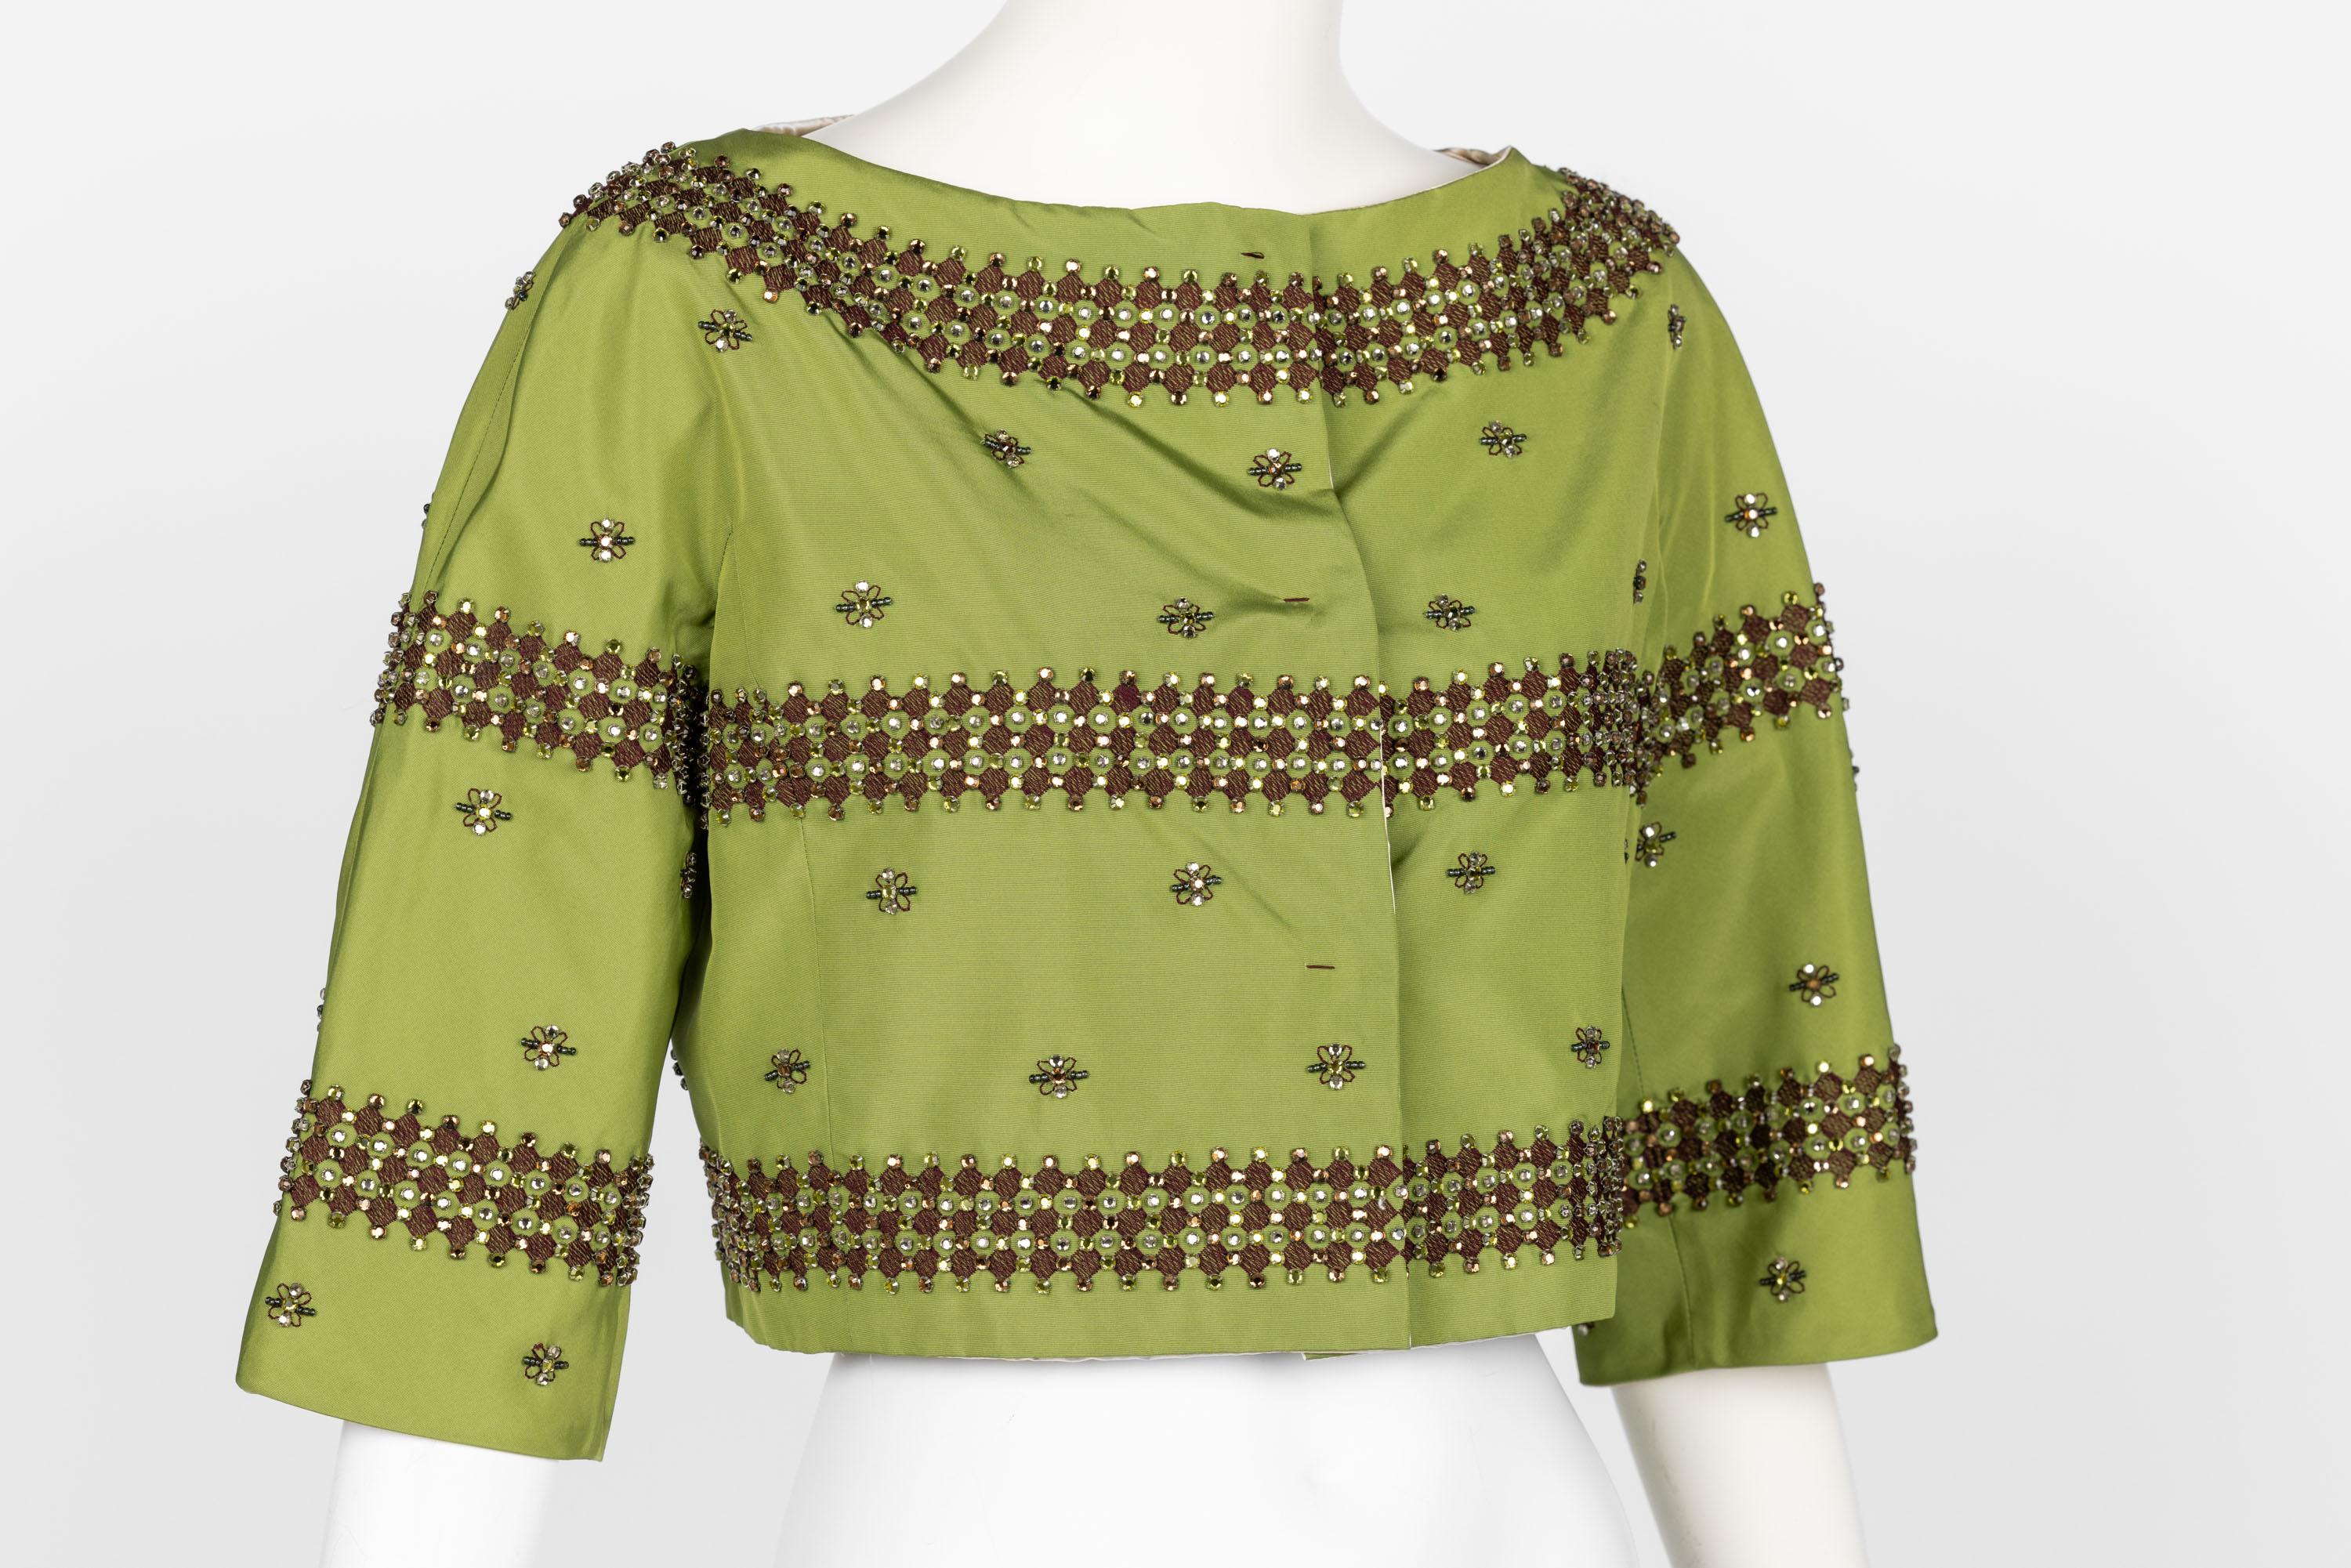 Prada F/W 2004 Green Silk Crystal Embellished Cropped Jacket Limited Edition In Good Condition For Sale In Boca Raton, FL